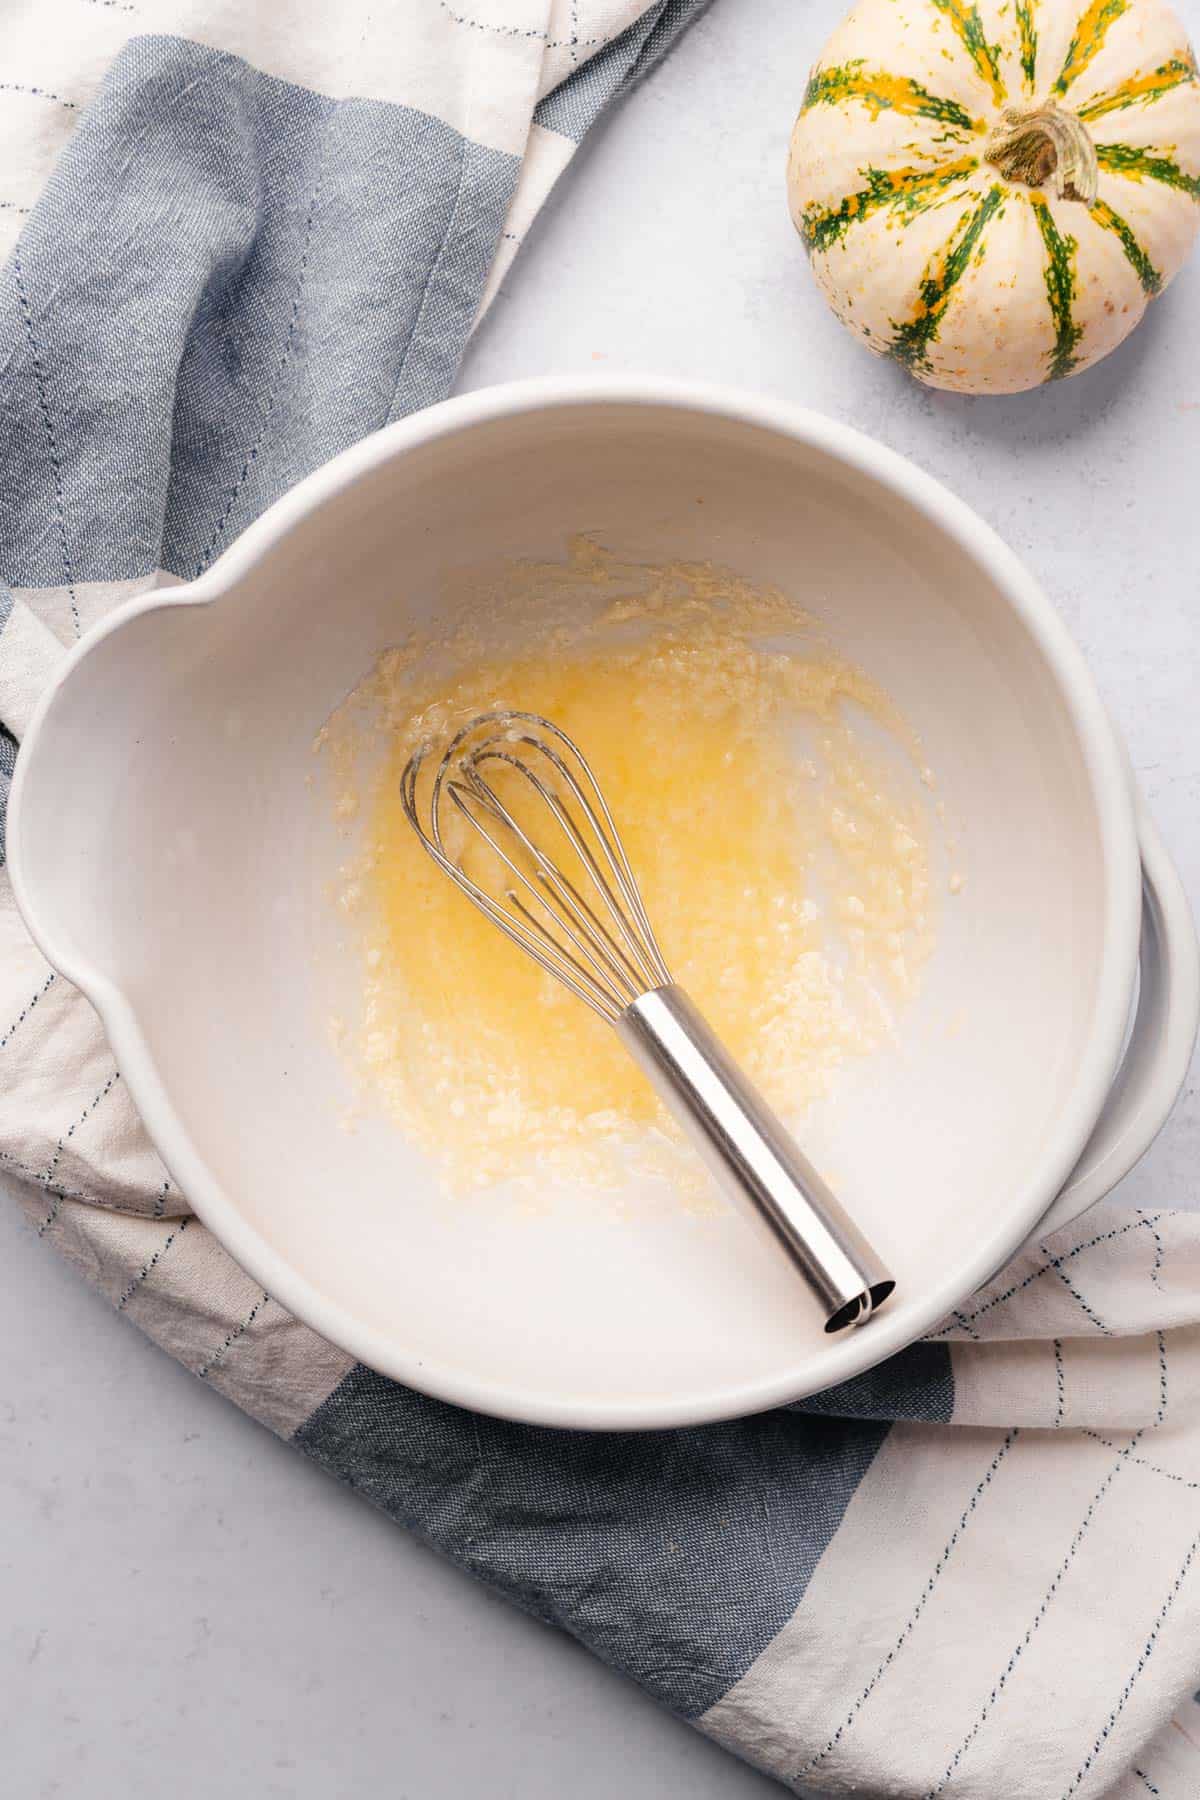 whisked butter and sweetener in a ceramic mixing bowl